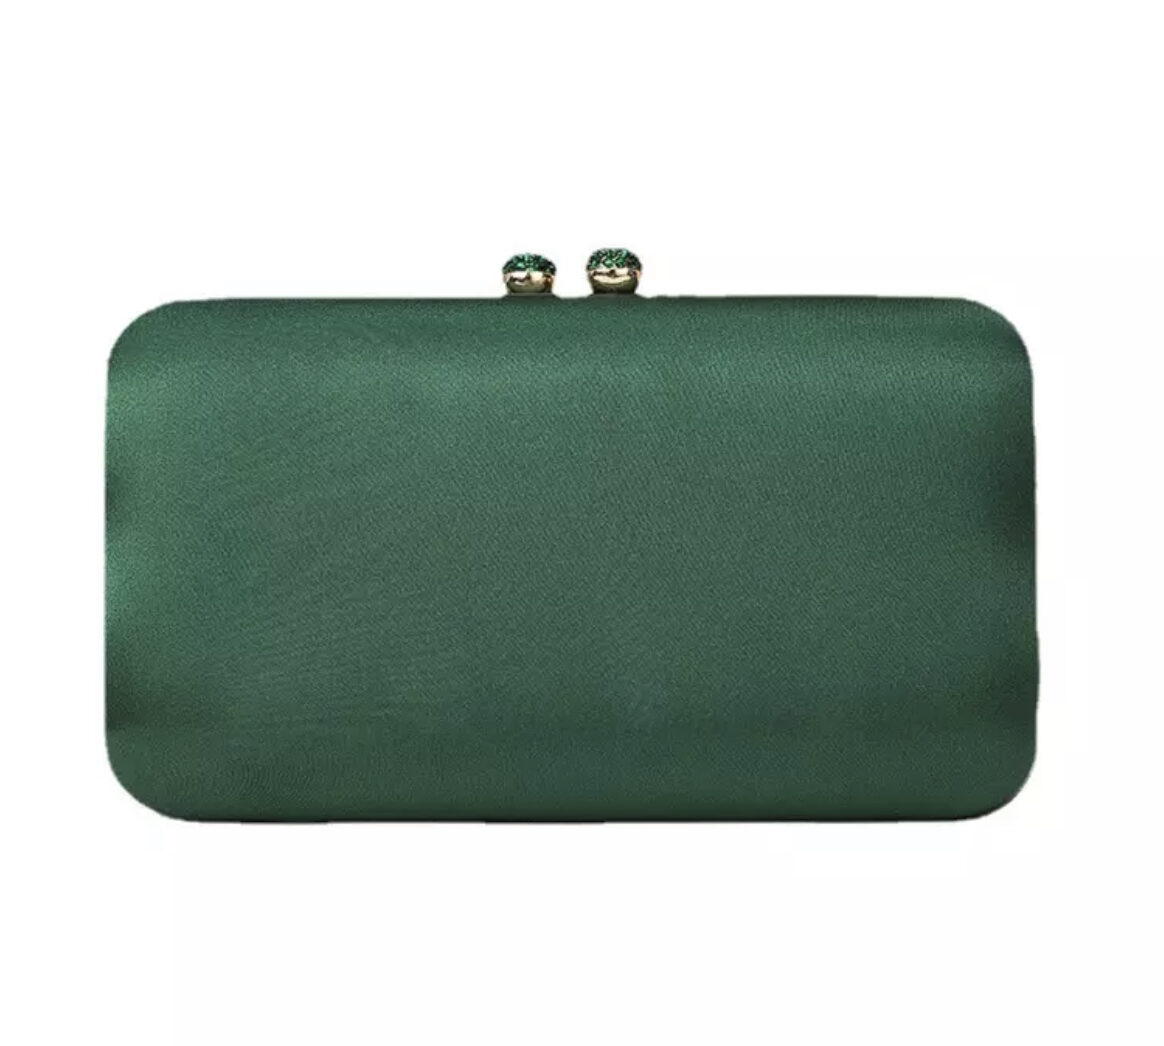 Green Evening Bag|Emery|Jeanette Maree|Shop Online Now